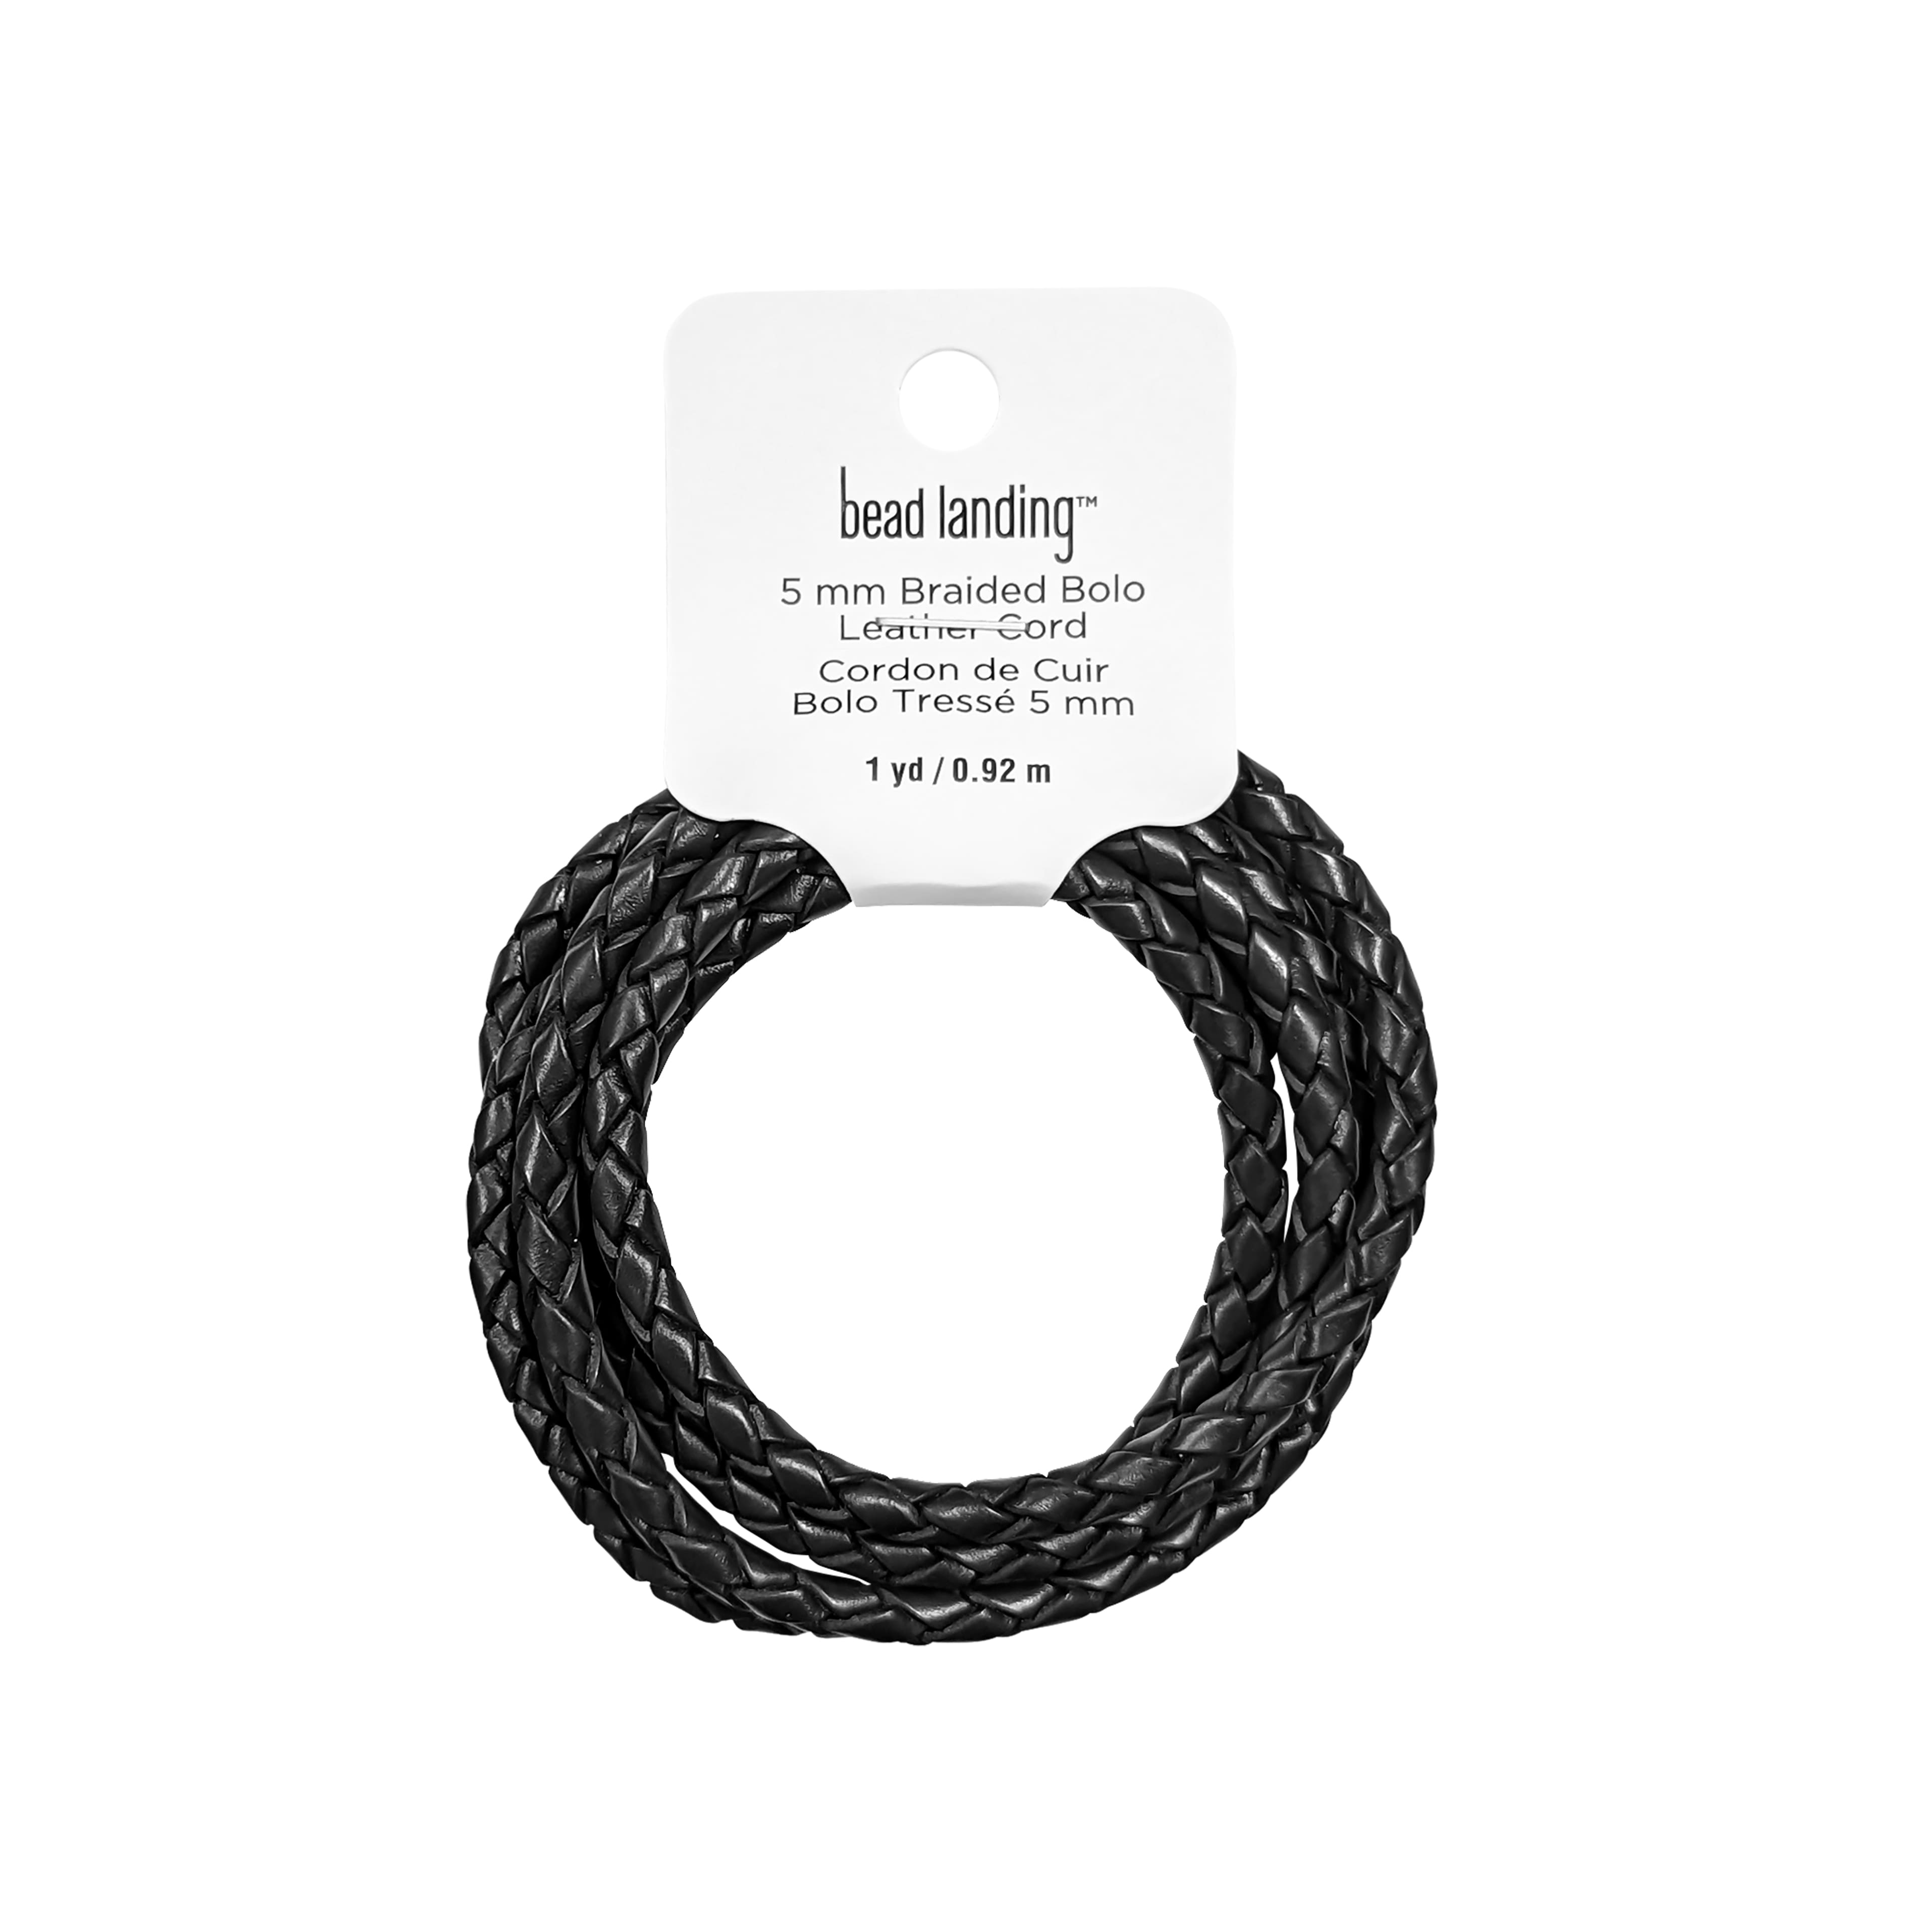 Braided Bolo Leather Cord by Bead Landing™, 1yd.